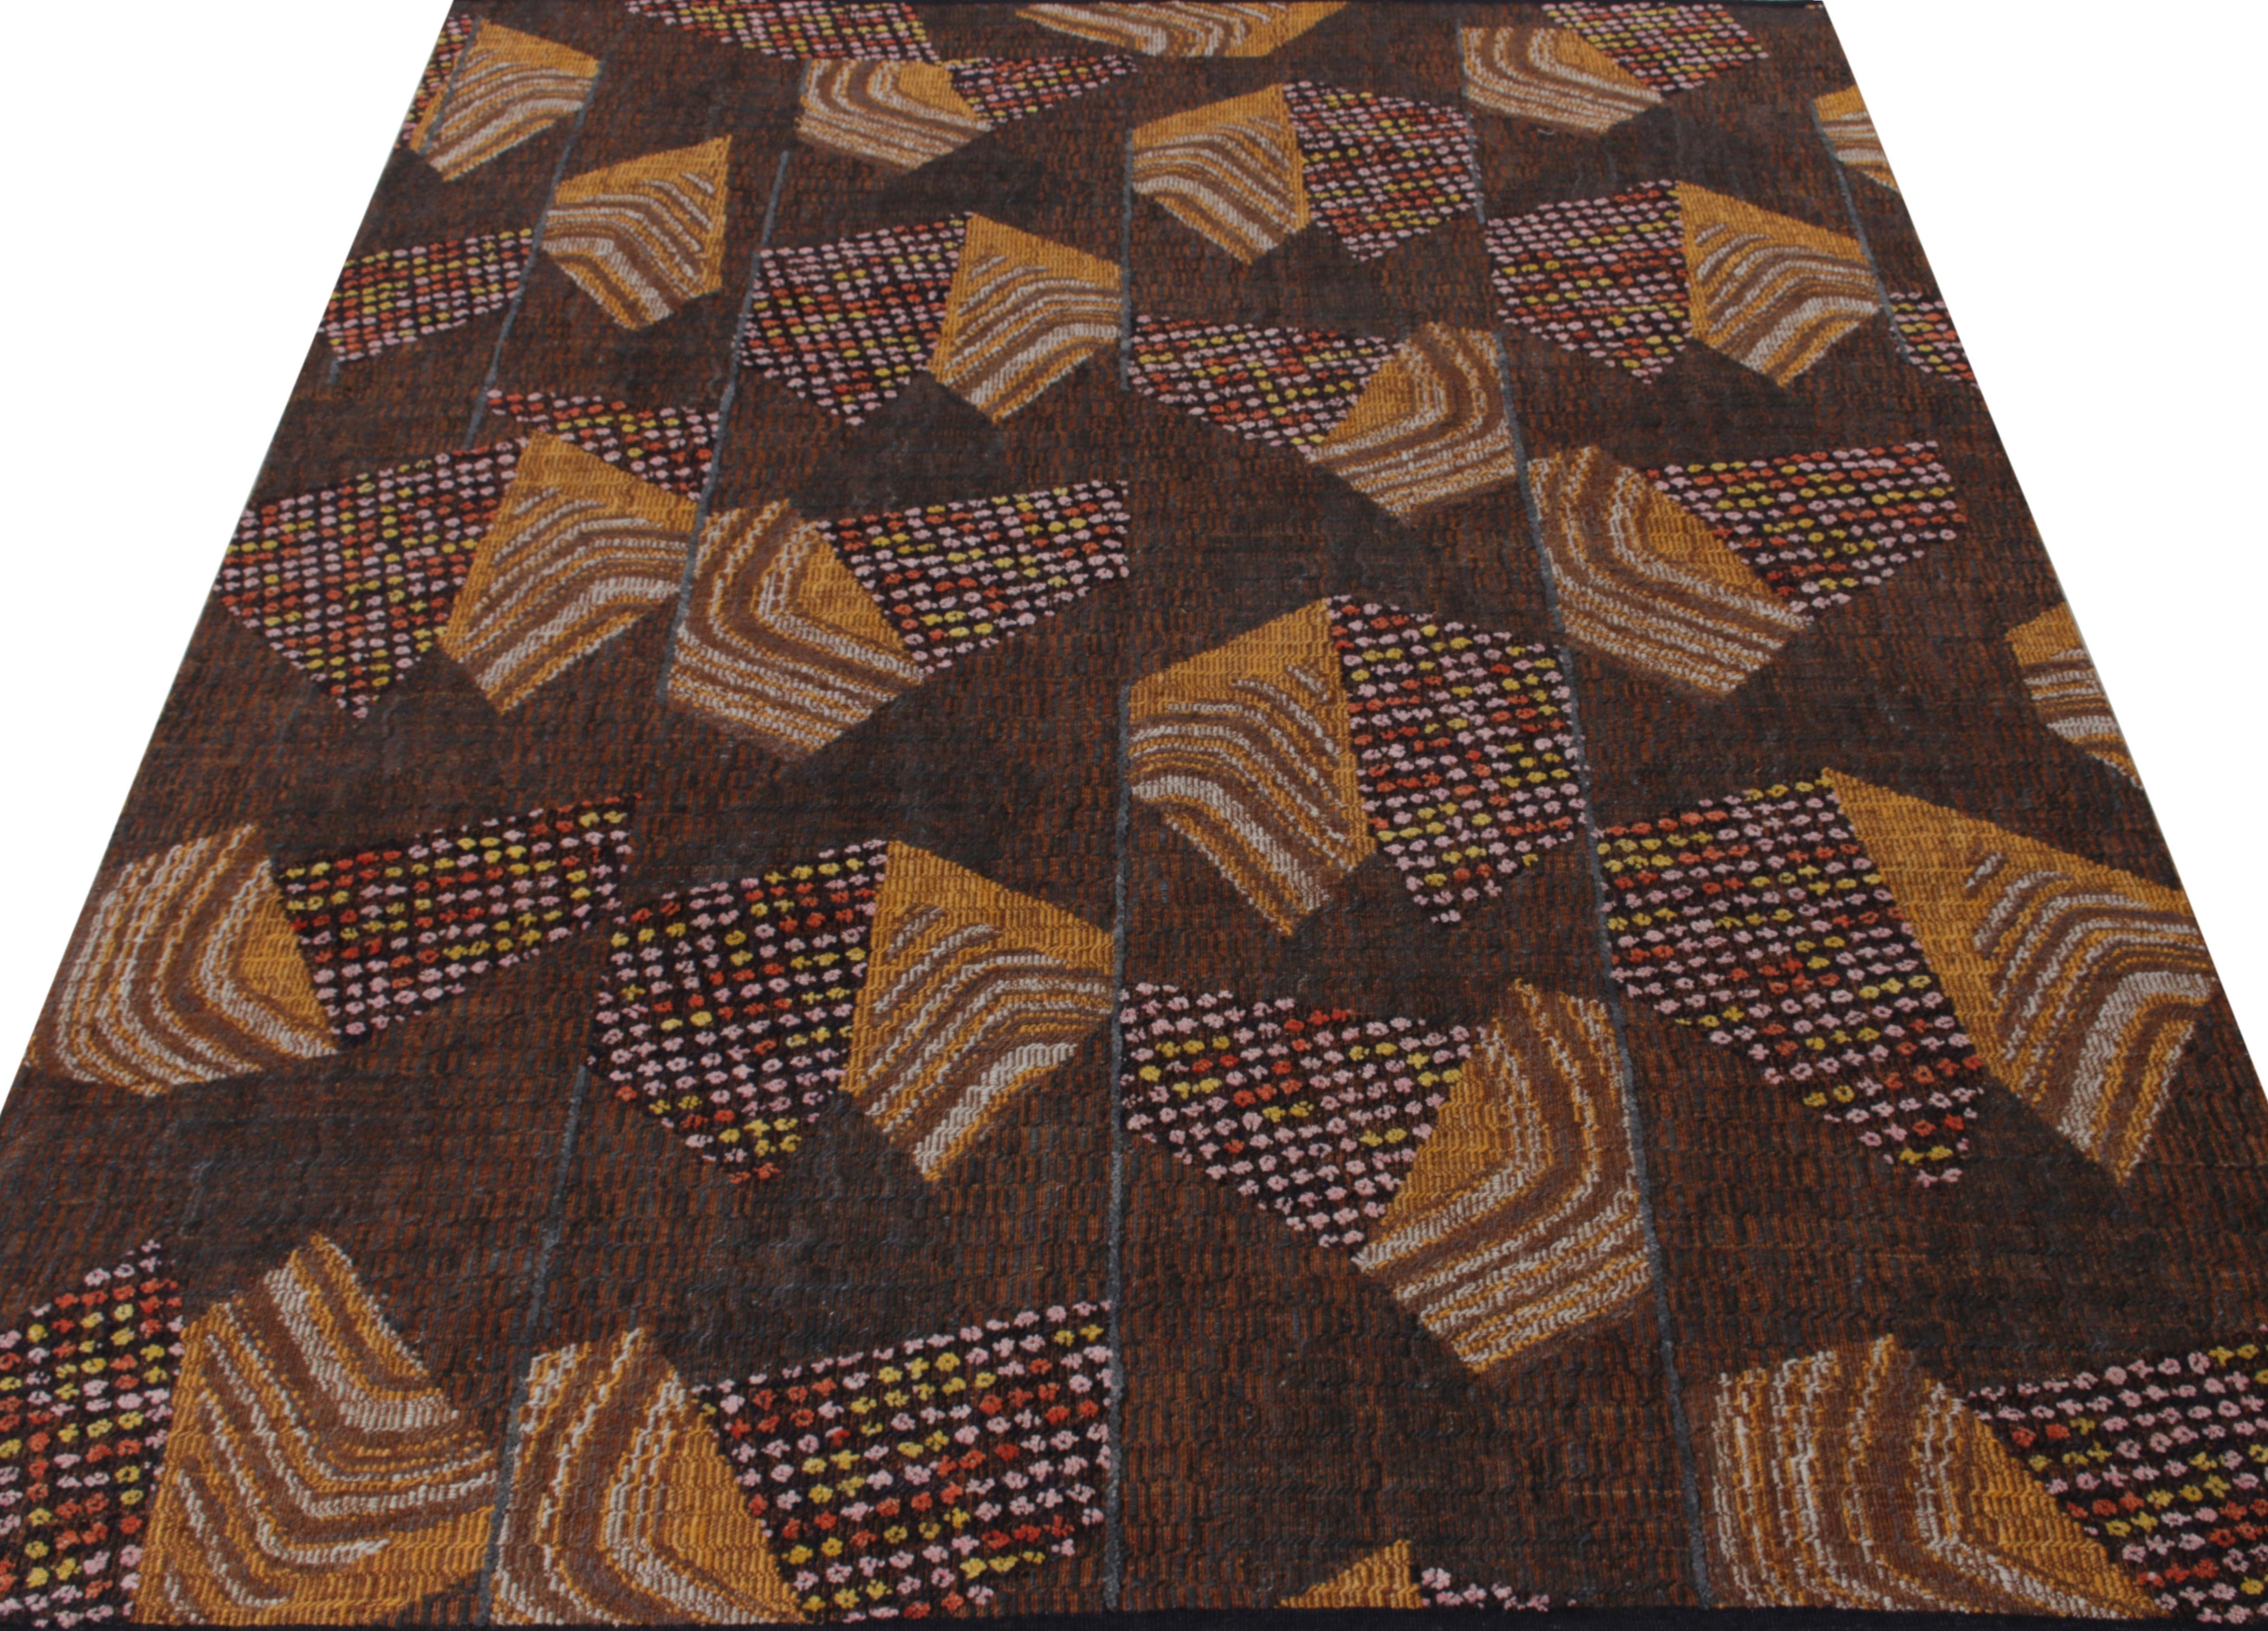 A 7x10 modern rug by Rug & Kilim, boldly reimaging a variety of influences from mid-century modern rug styles to abstract art sensibilities. Hand-knotted in wool with a high-low texture, complementing the 1950s geometry with movement and